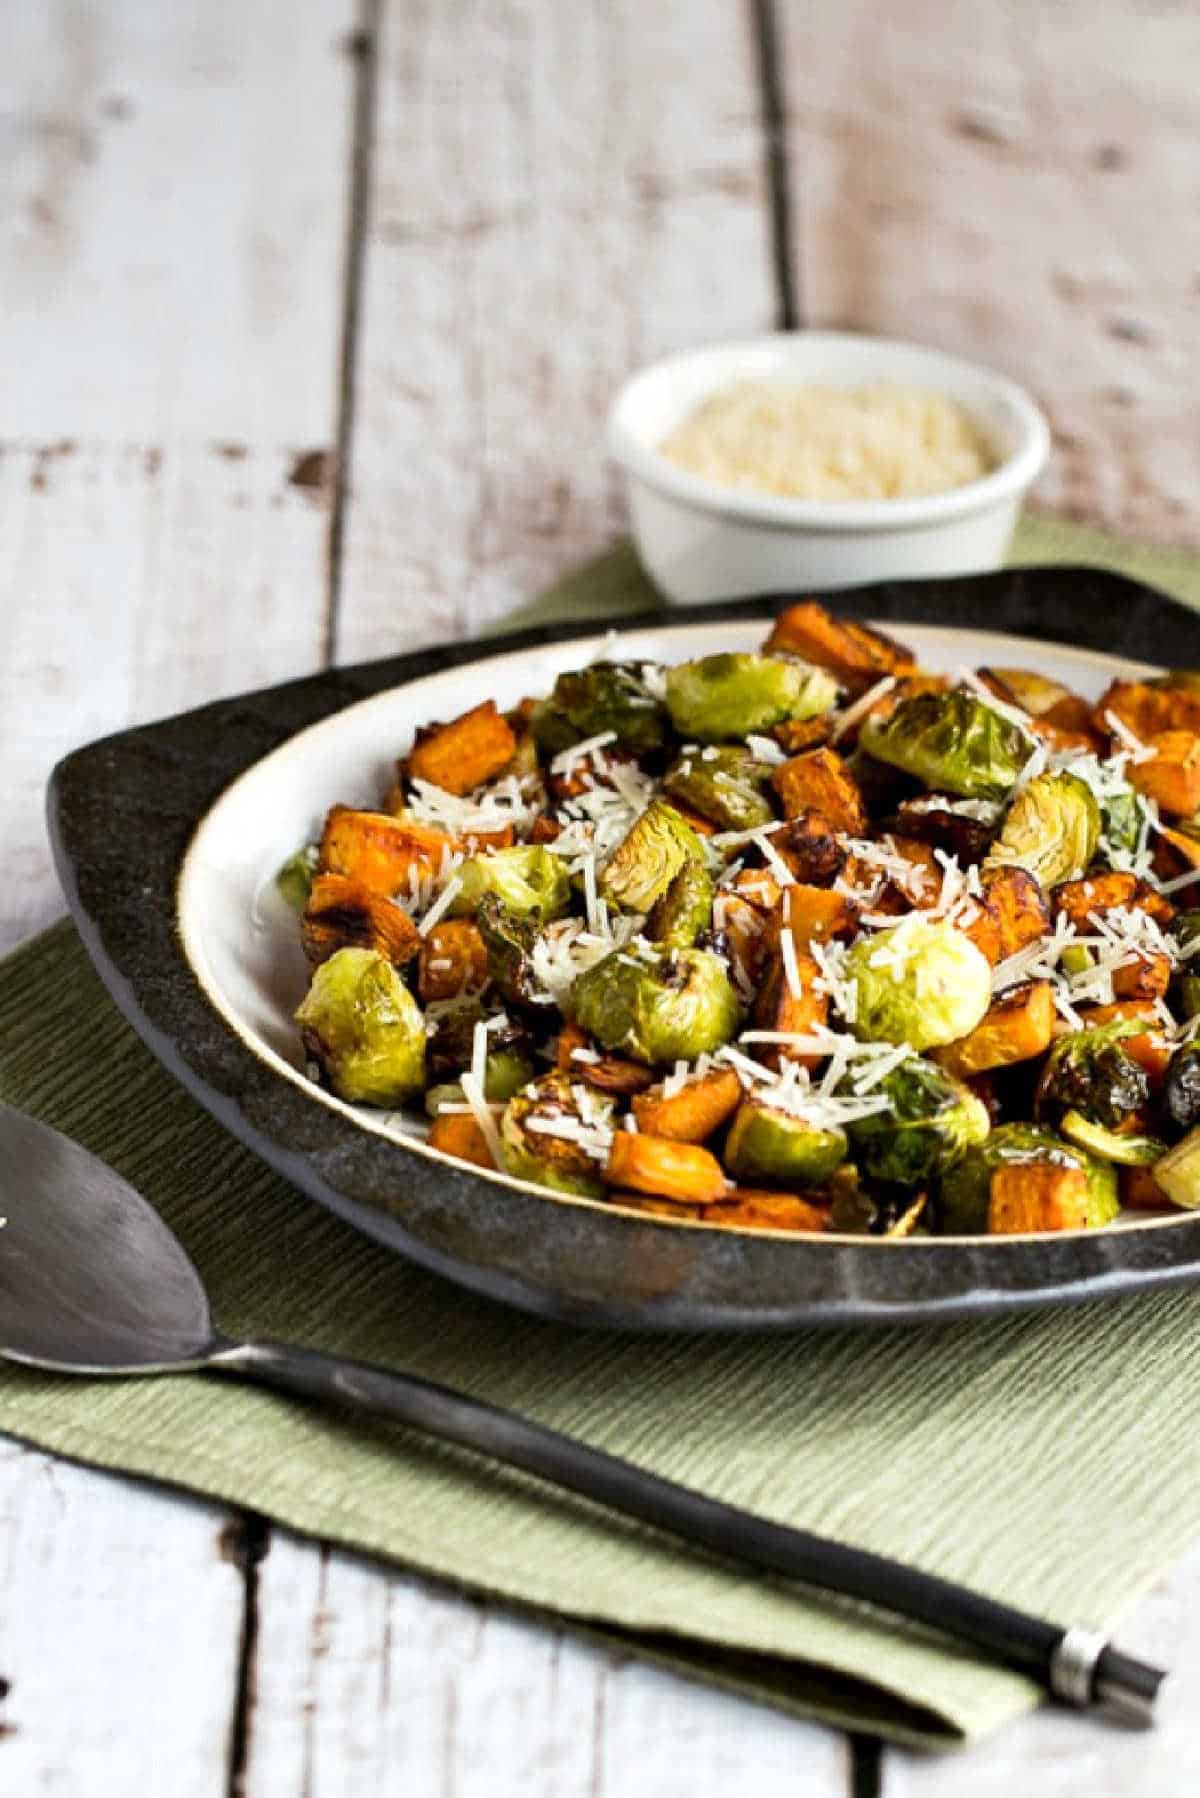 Sweet potatoes and brussels sprouts on a serving plate